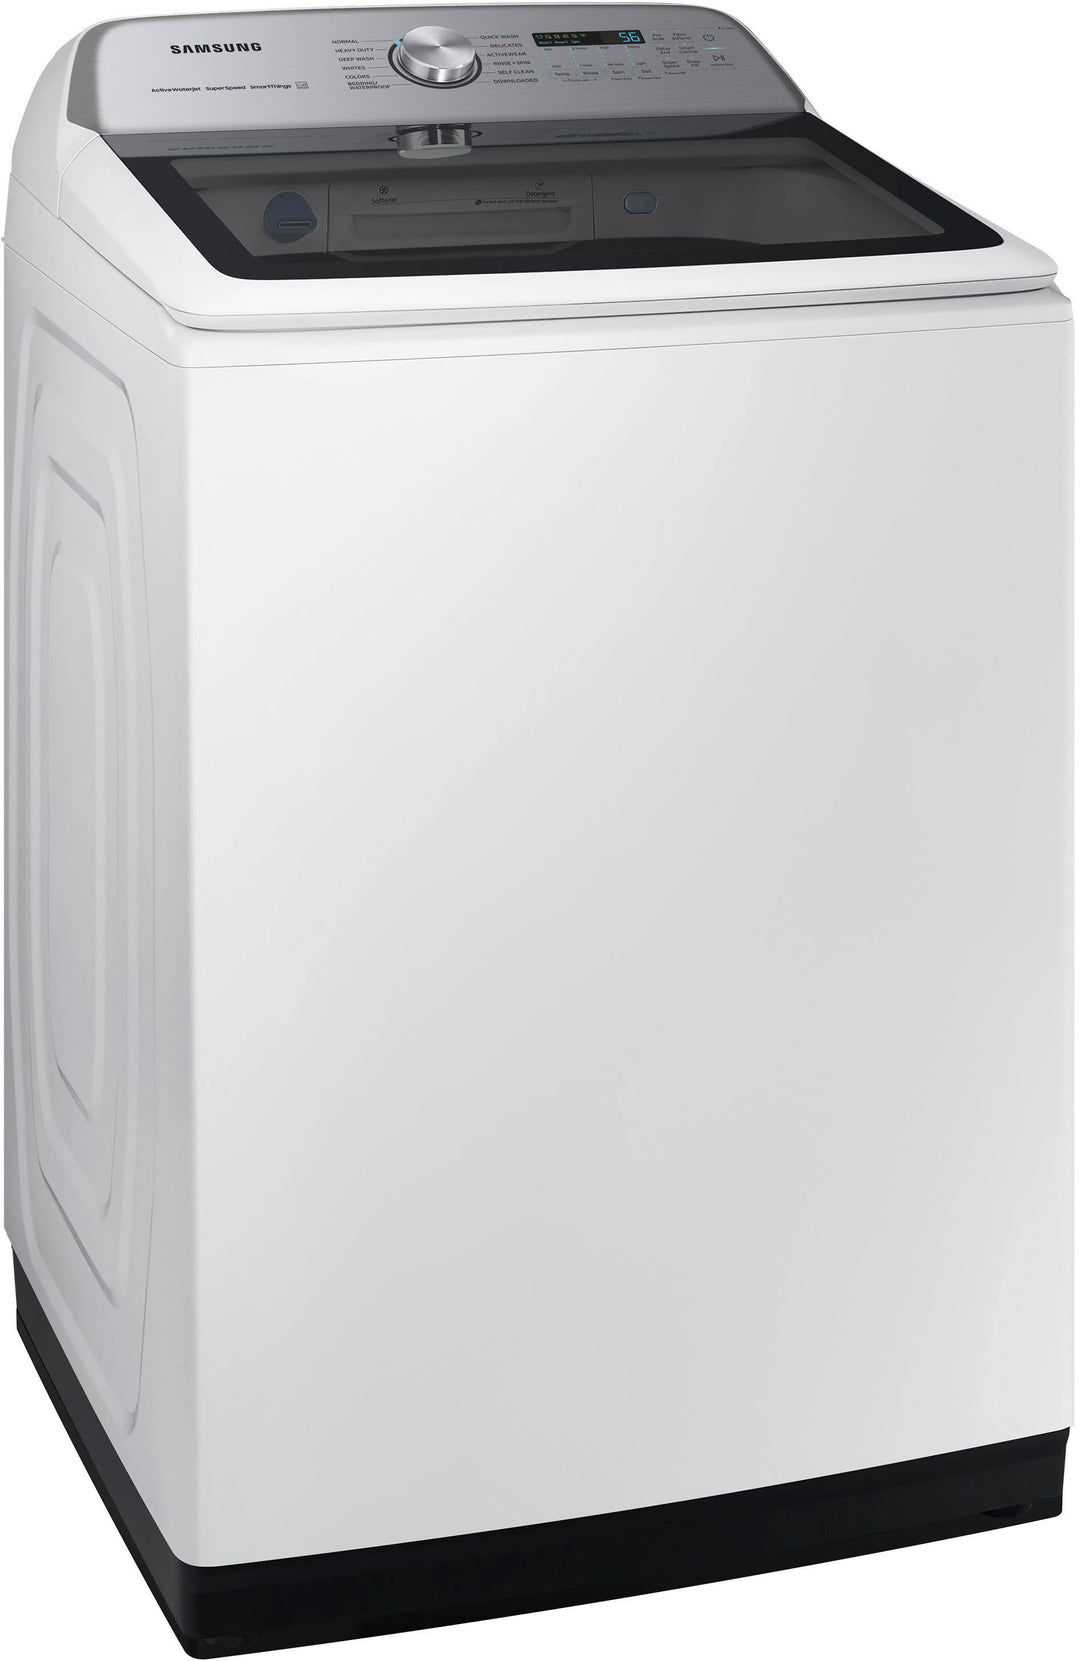 Samsung - 5.2 cu. ft. Large Capacity Smart Top Load Washer with Super Speed Wash - White_9